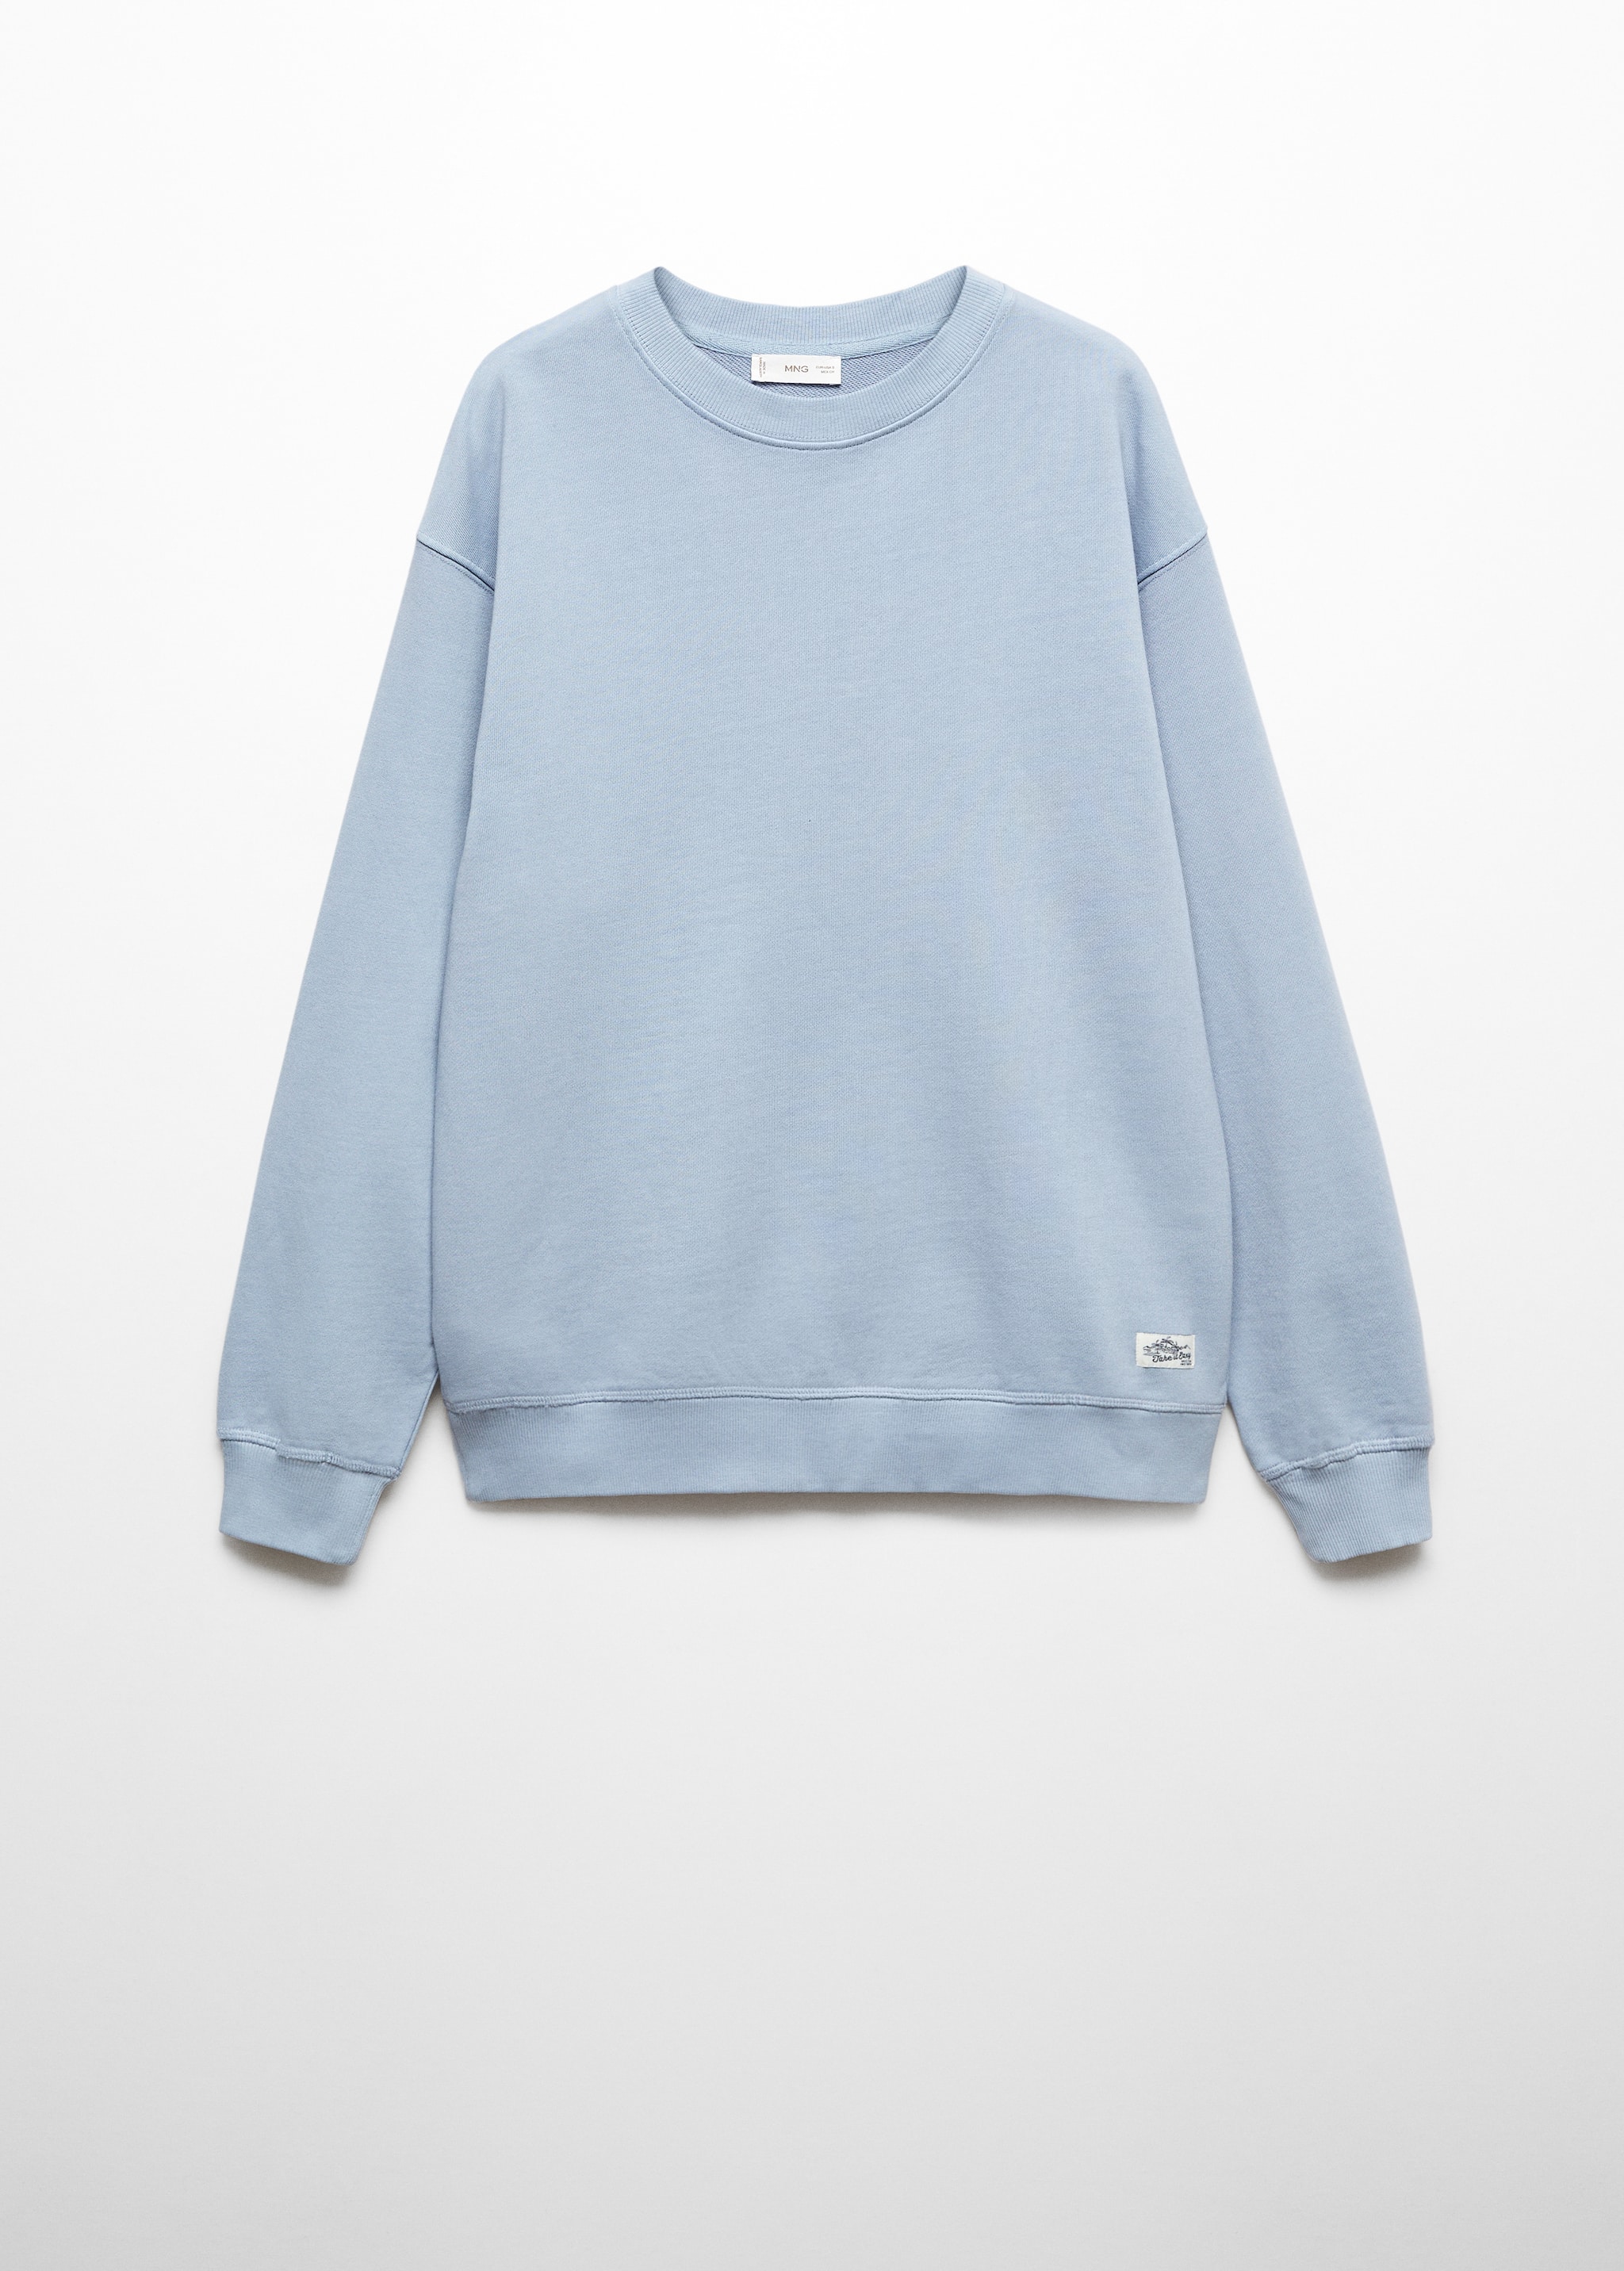 Cotton sweatshirt - Article without model